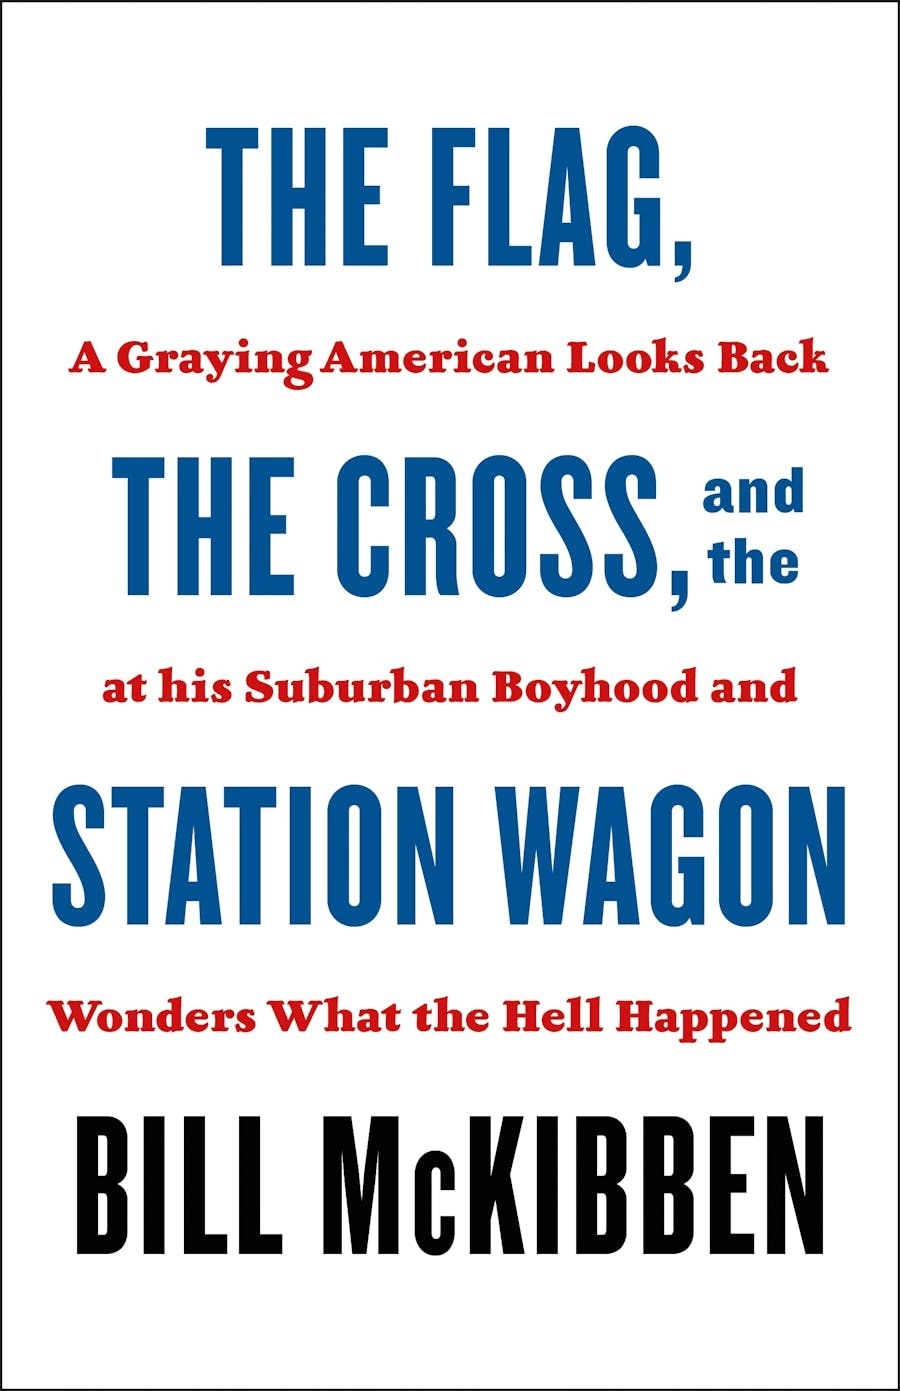 book cover for &quot;The Flag, the Cross, and the Station Wagon...&quot; which is just a blank background with the title on it written in capital letters